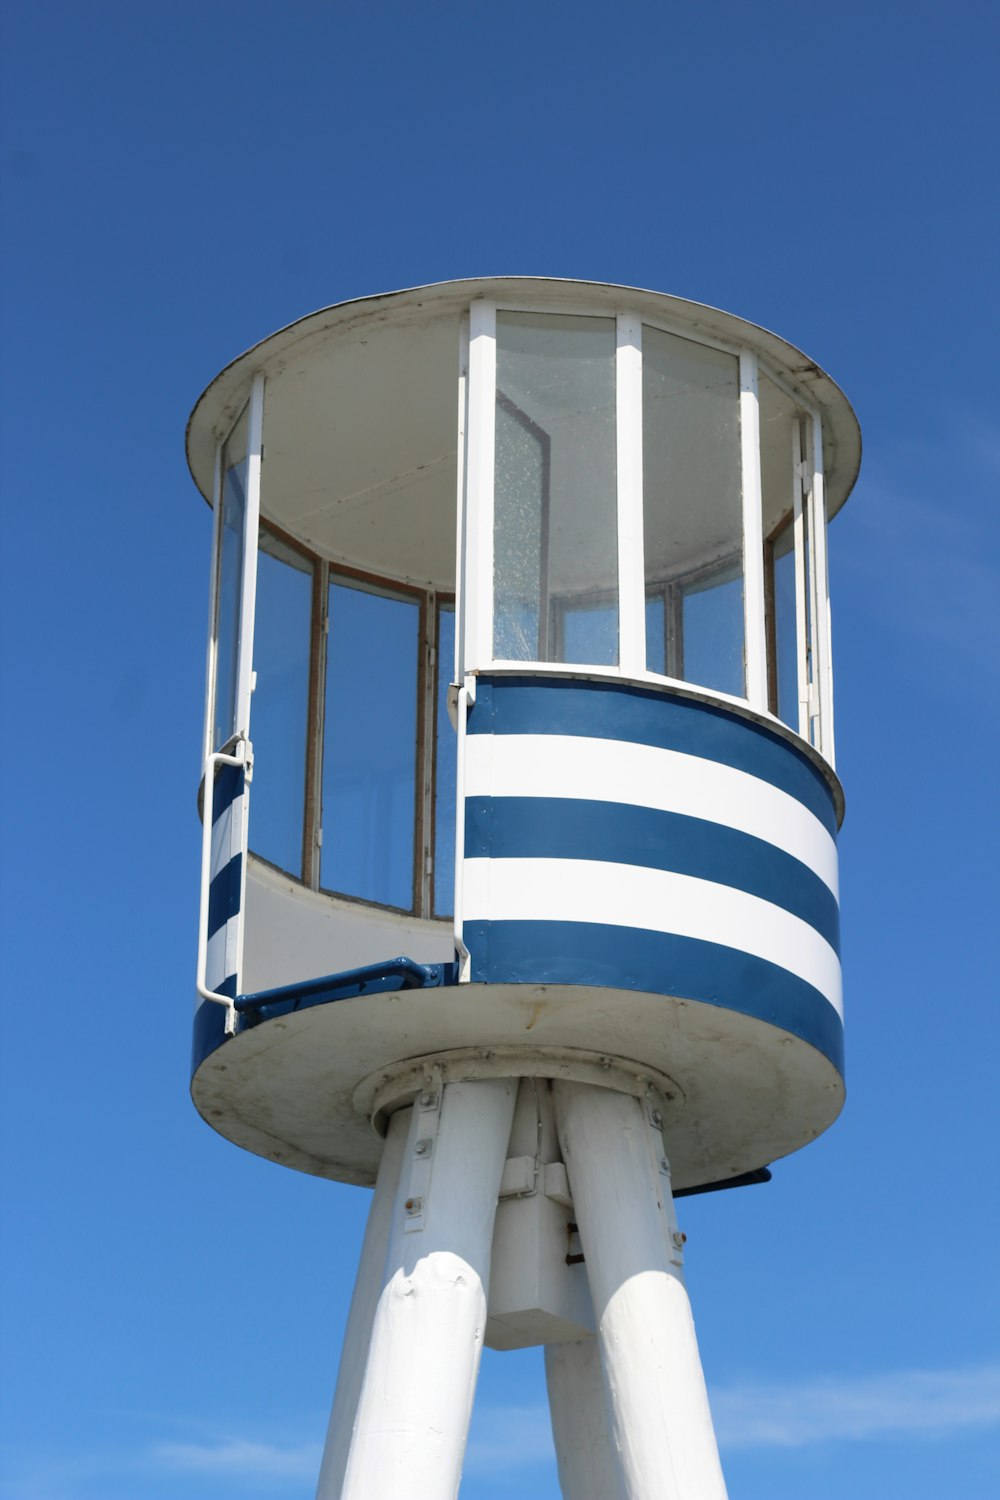 a water tower with a blue sky